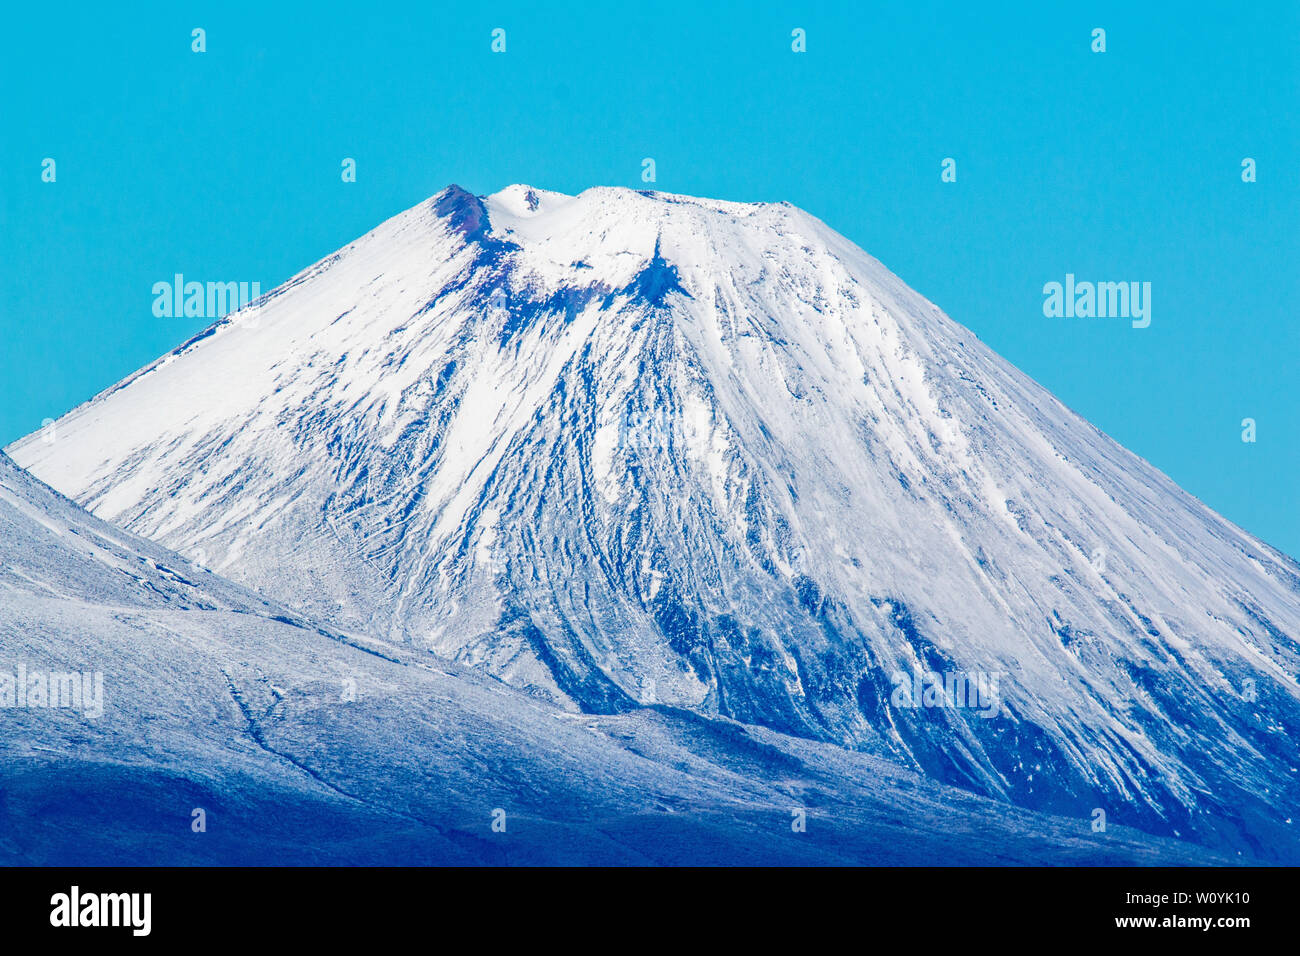 Volcanic cone covered in snow Stock Photo